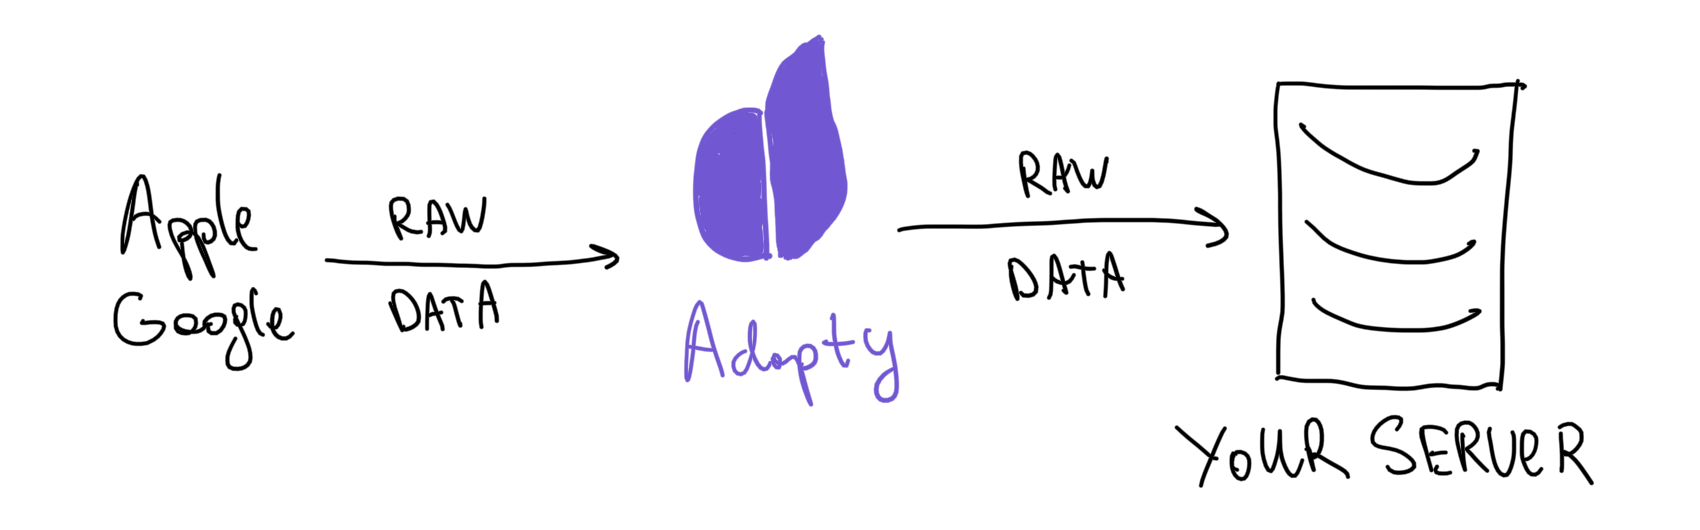 scheme of raw data flow from apple/google to your server through adapty